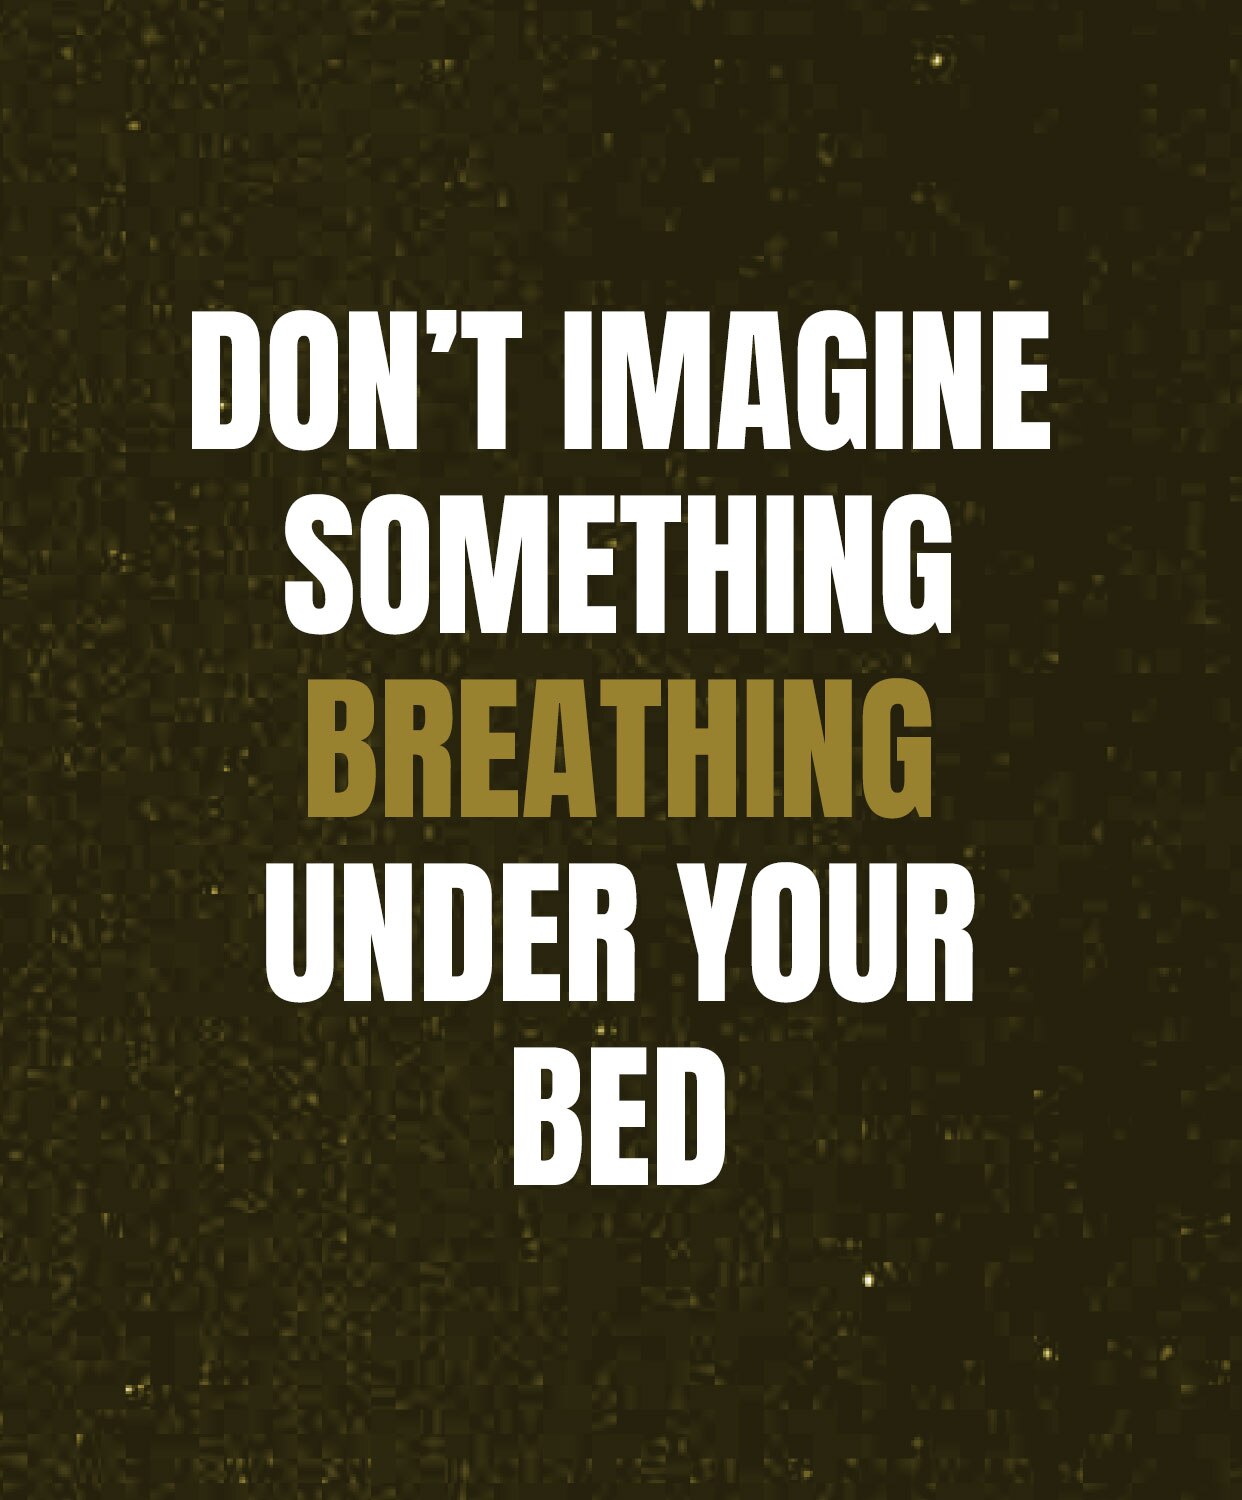 Don't imagine something breathing under your bed